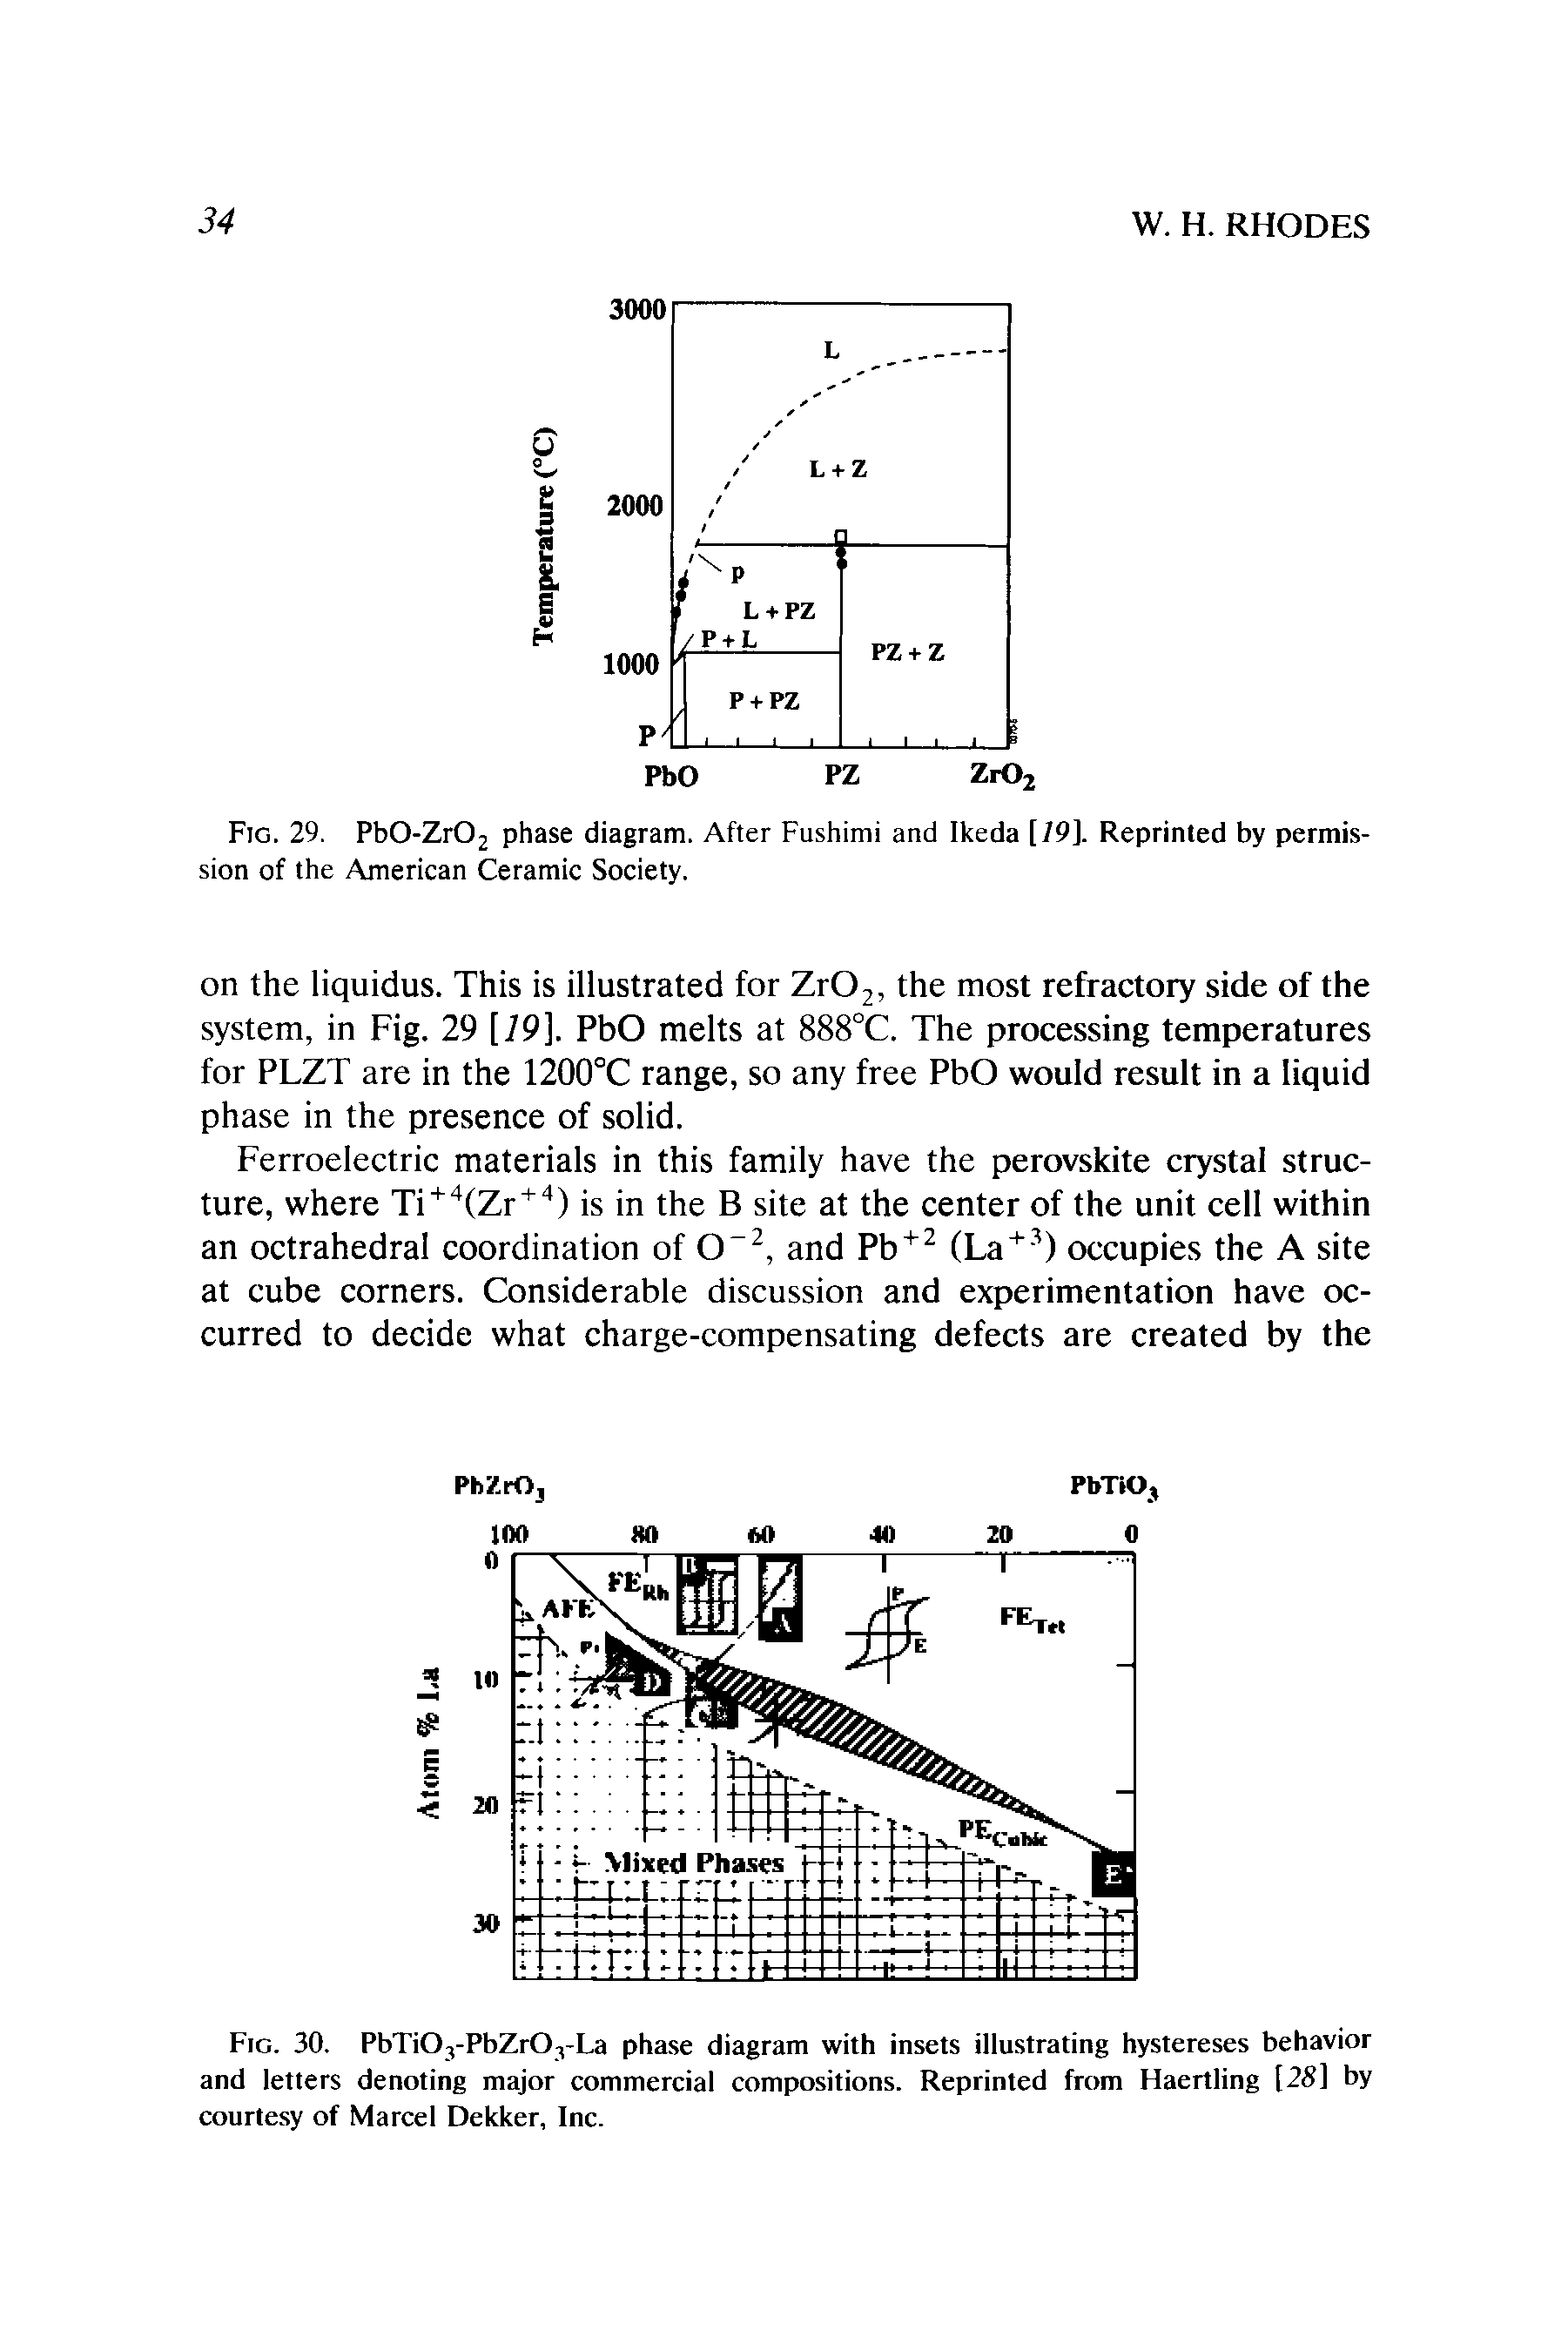 Fig. 30. PbTi03-PbZrOvLa phase diagram with insets illustrating hystereses behavior and letters denoting major commercial compositions. Reprinted from Haertling [28] by courtesy of Marcel Dekker, Inc.